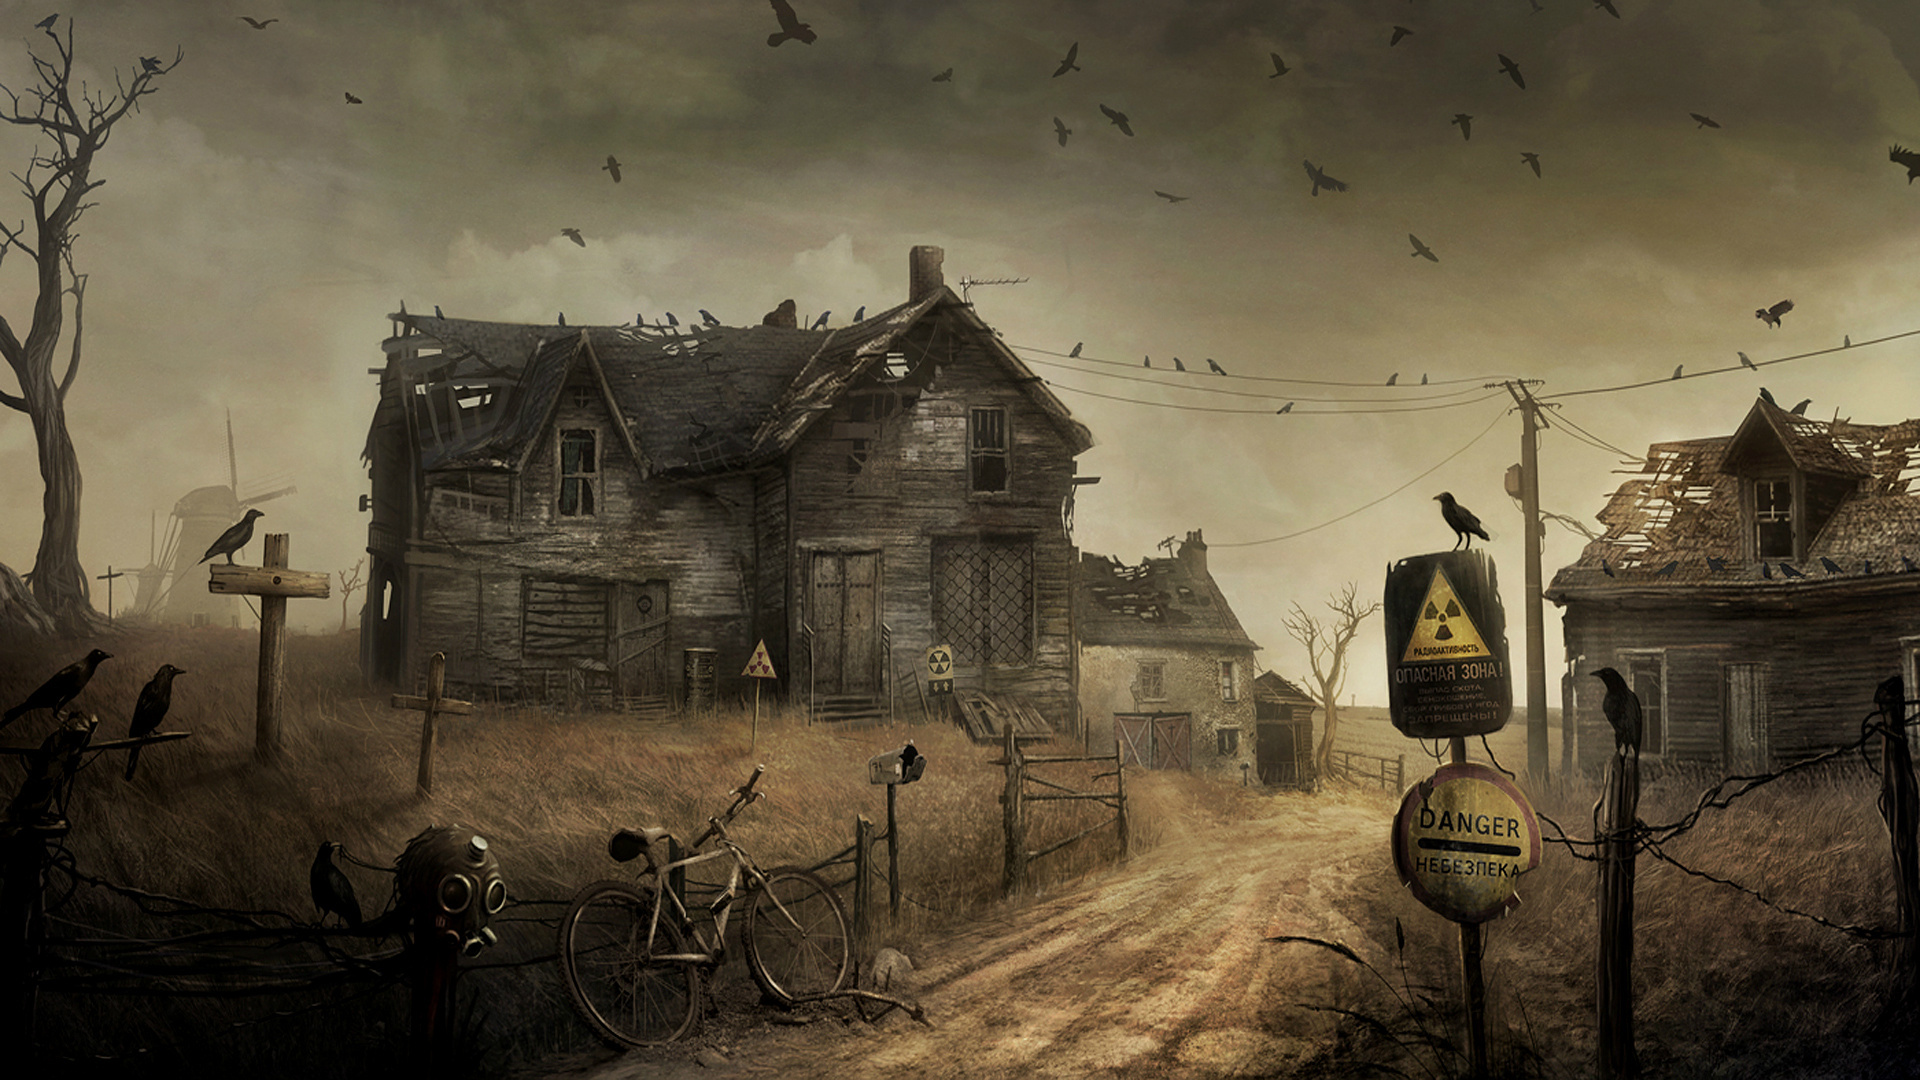 Crows Ravens Bicycle Houses Haunted Destruction Wallpaper Background